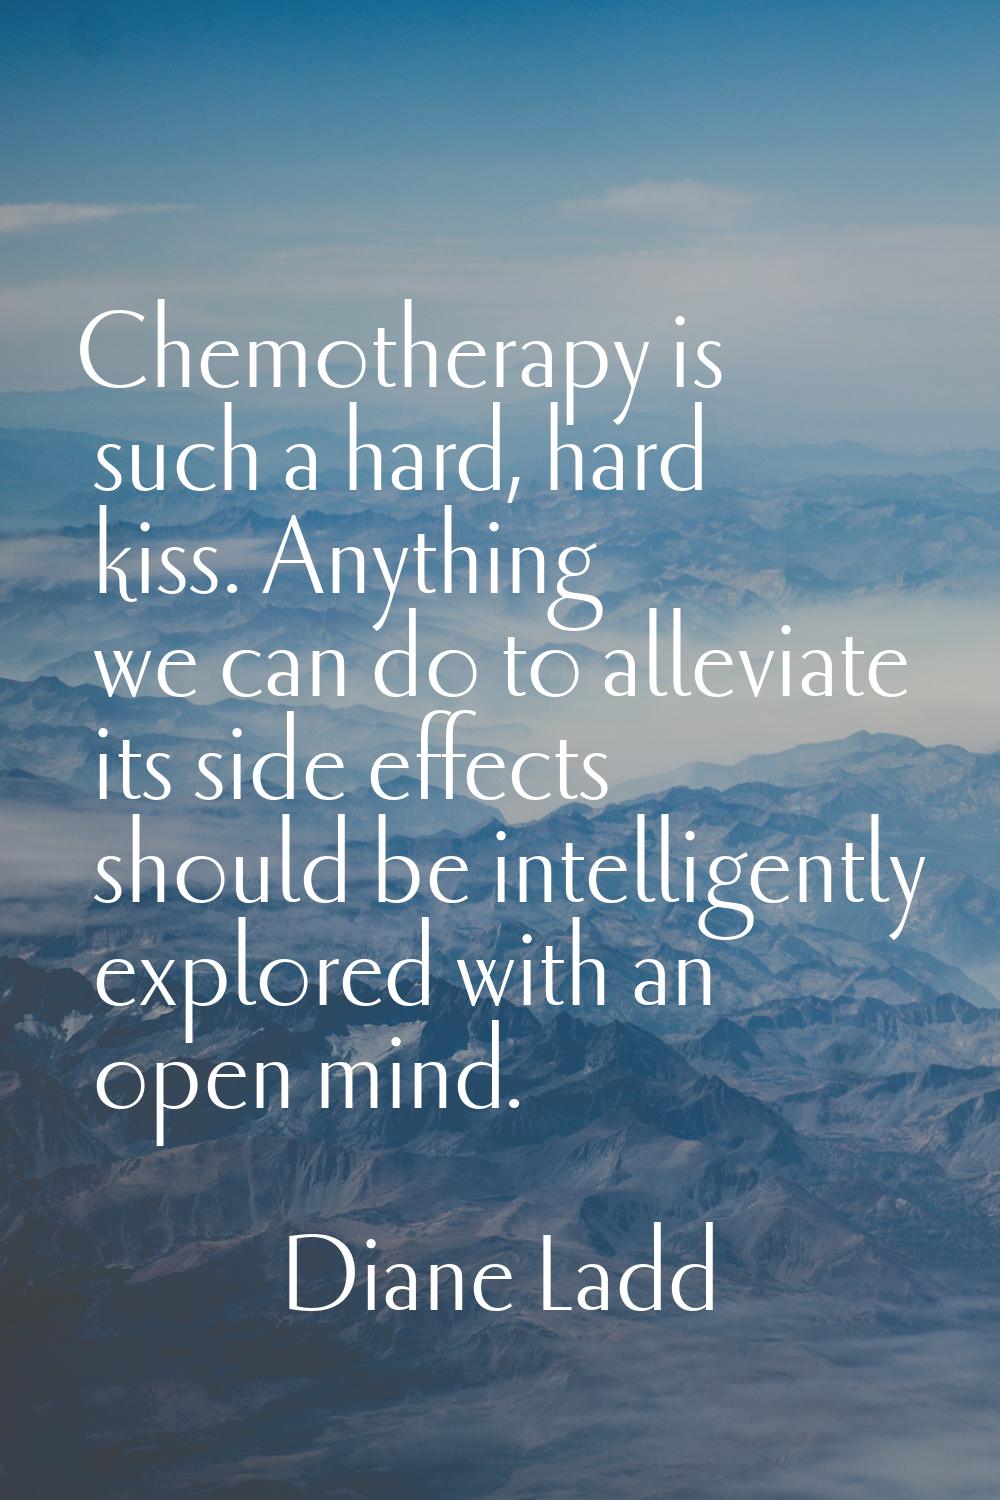 Chemotherapy is such a hard, hard kiss. Anything we can do to alleviate its side effects should be 